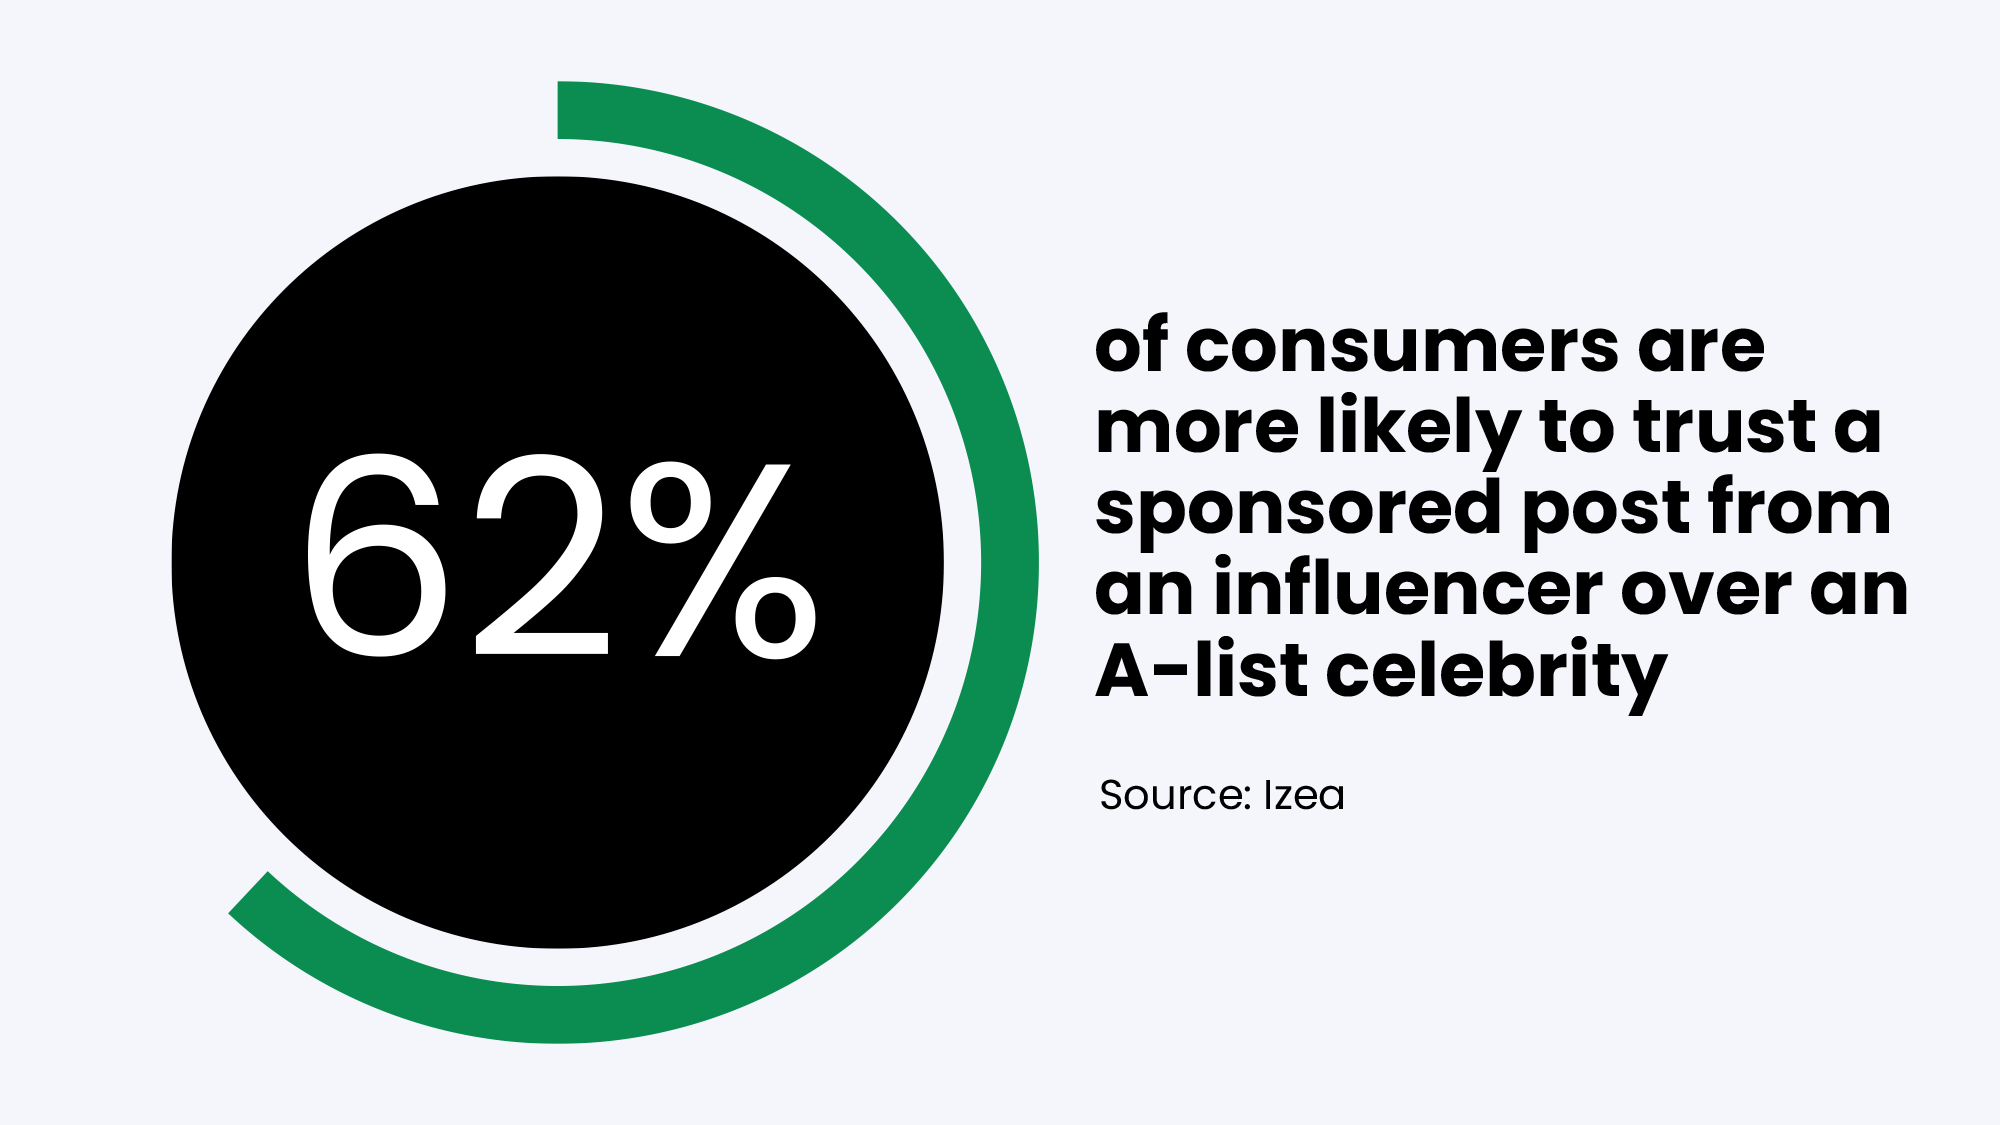 62% of consumers are more likely to trust a sponsored post from an influencer over an A-list celebrity